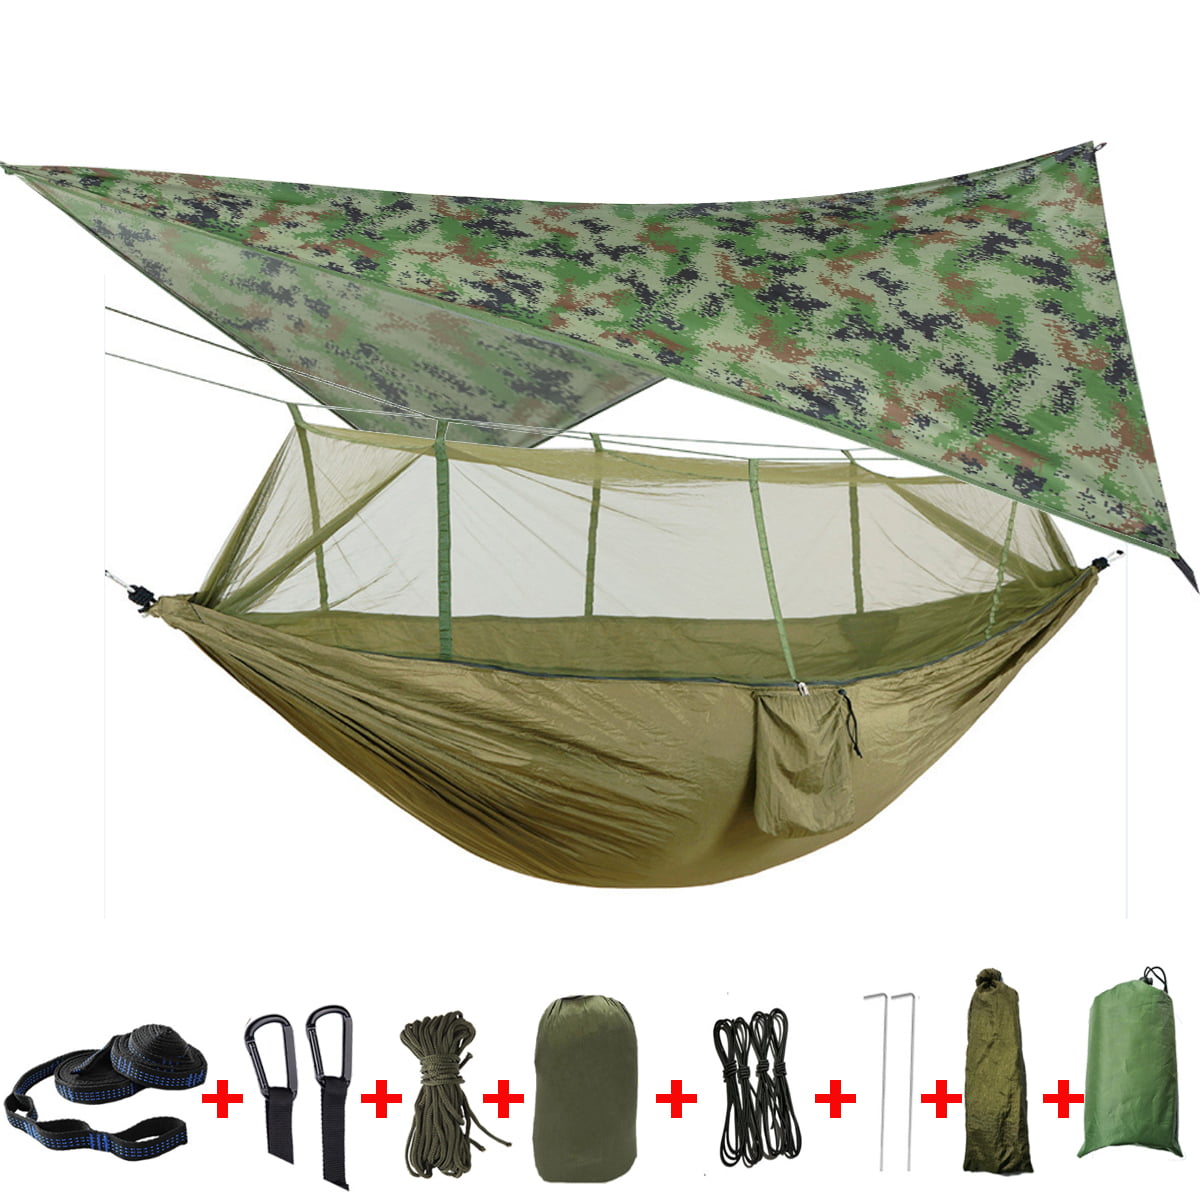 FRH Portable Large Outdoor Camping Hammock with Mosquito Net High Strength Parachute Fabric Hanging Sleeping Bed for Camping Backpacking Travel Beach 260x140CM